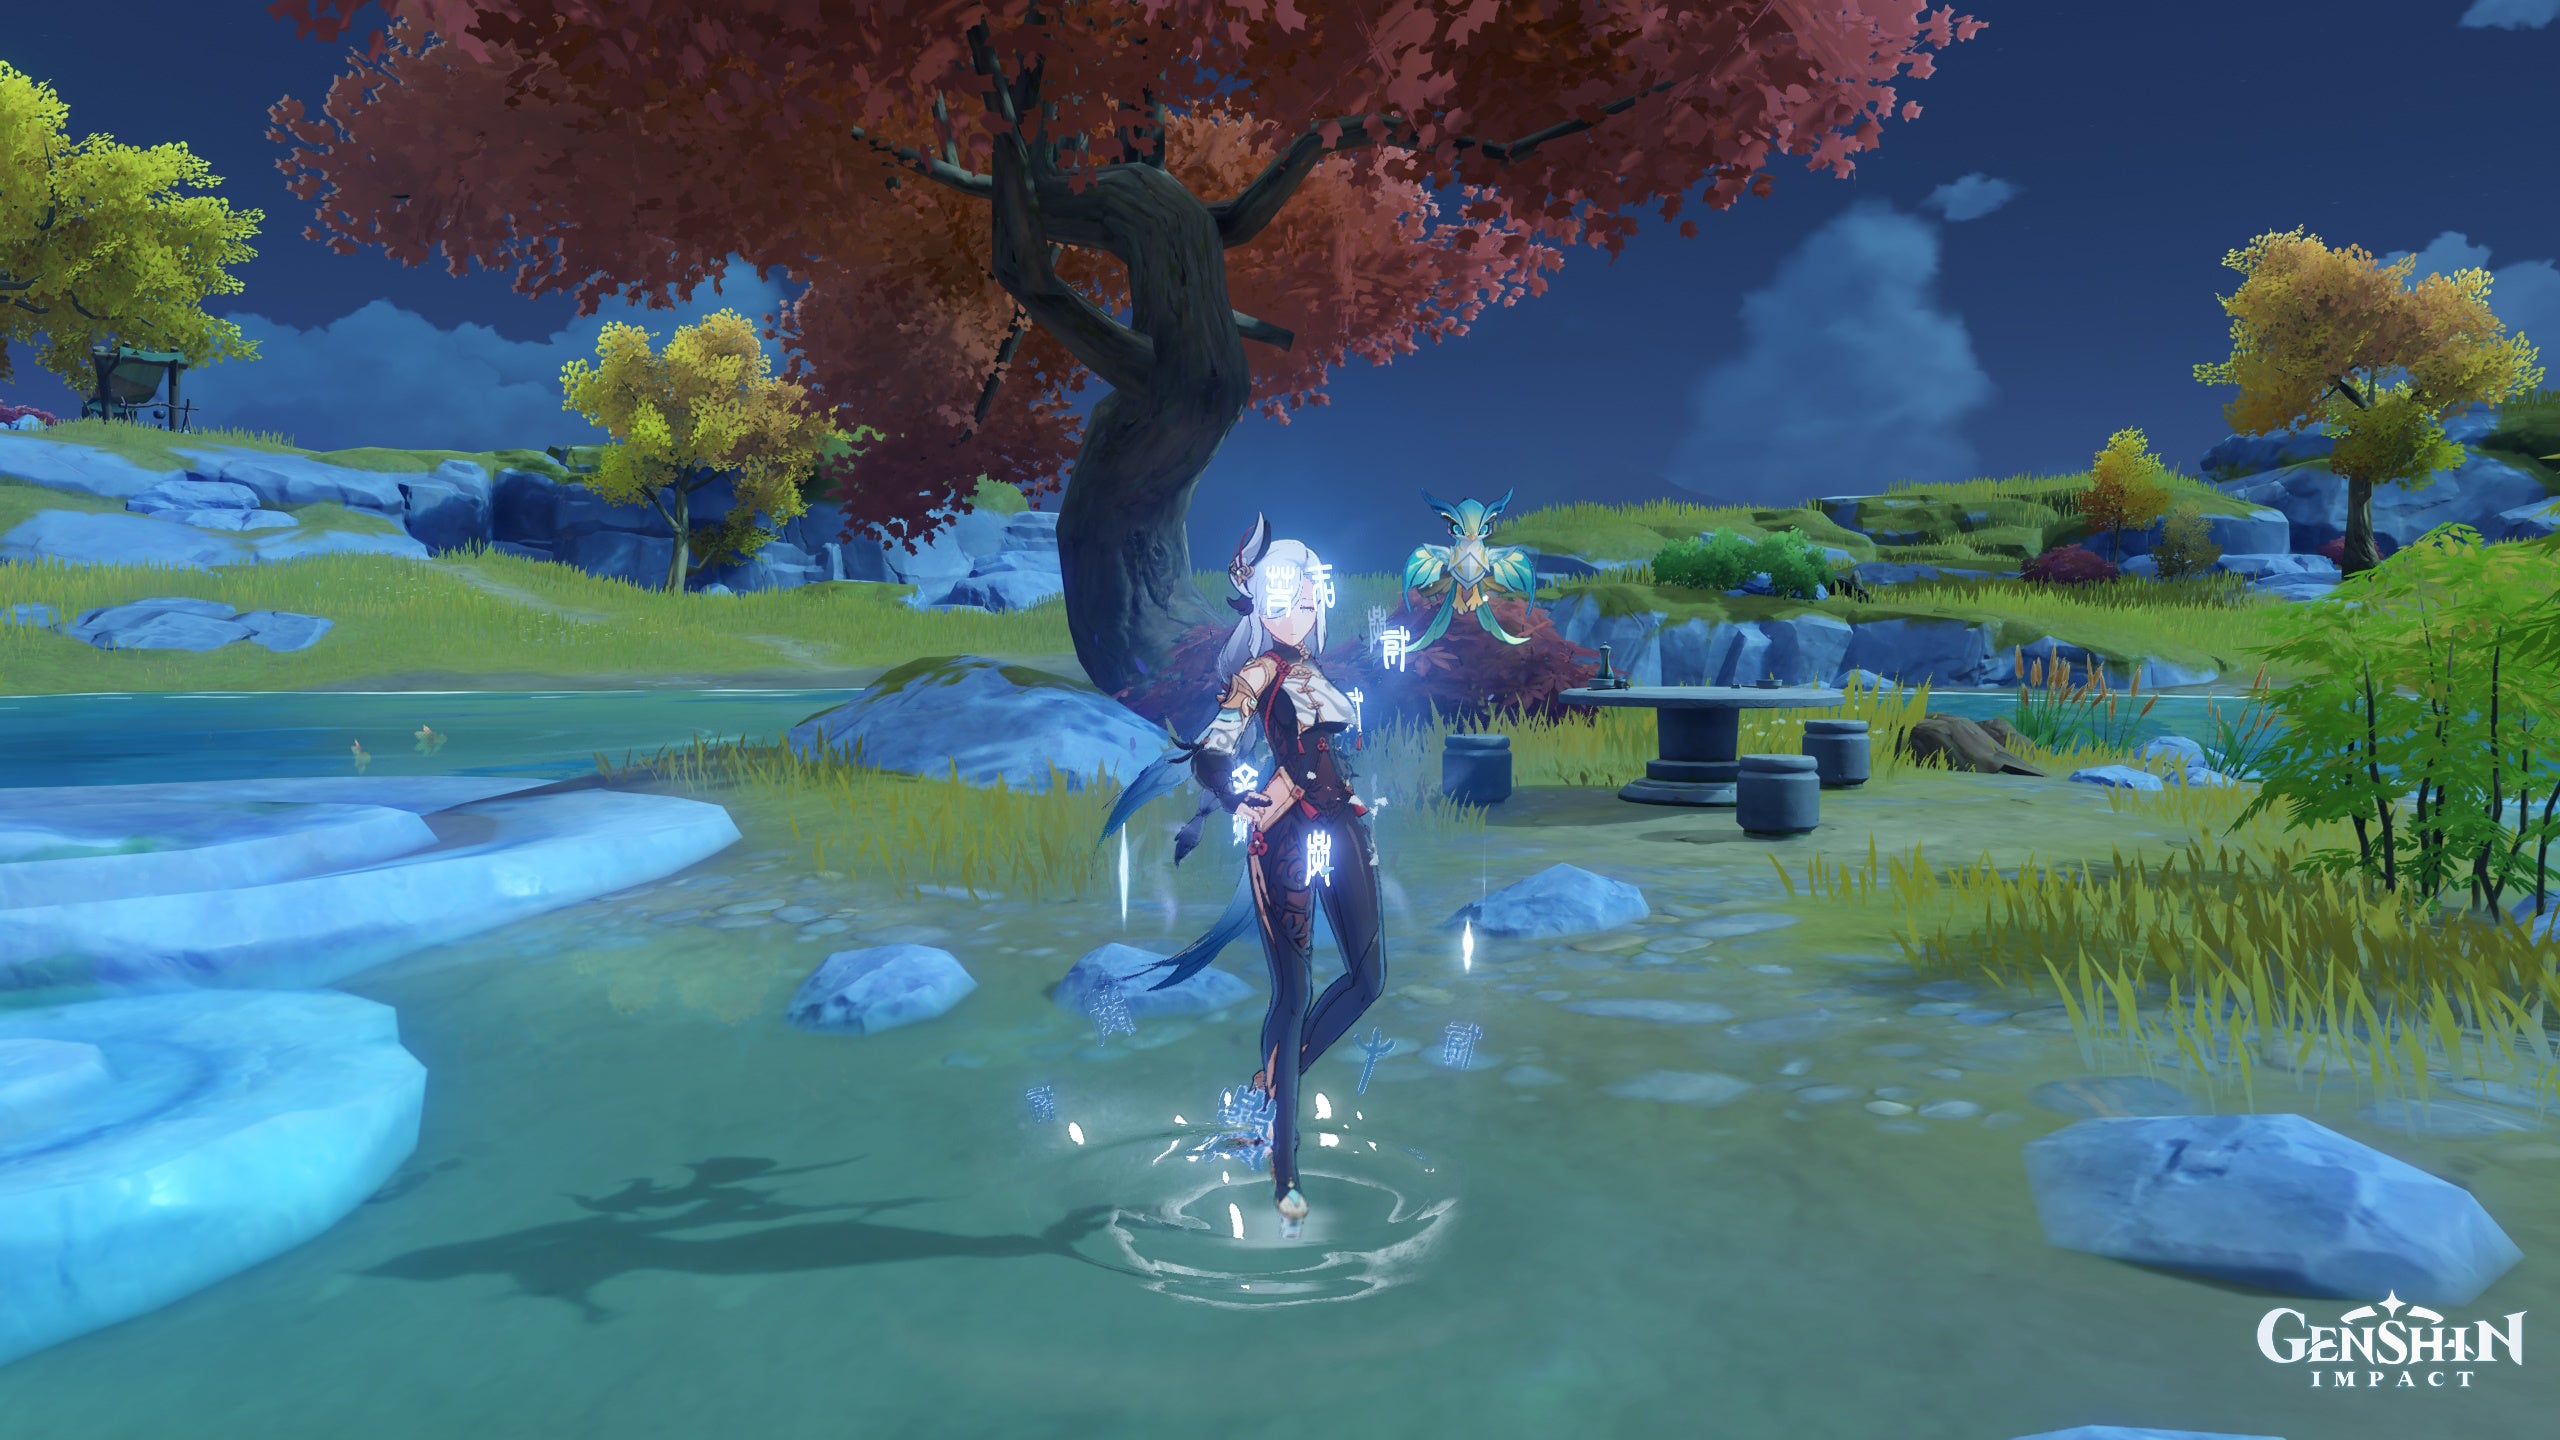 Genshin Impact Shenhe materials: An anime woman wearing a black leotard with gold trimming, and a cape that resembles blue and white feathers, is standing in a shallow lake. Ice swirls around her, contrasting sharply with the orange and yellow foliage of nearby trees